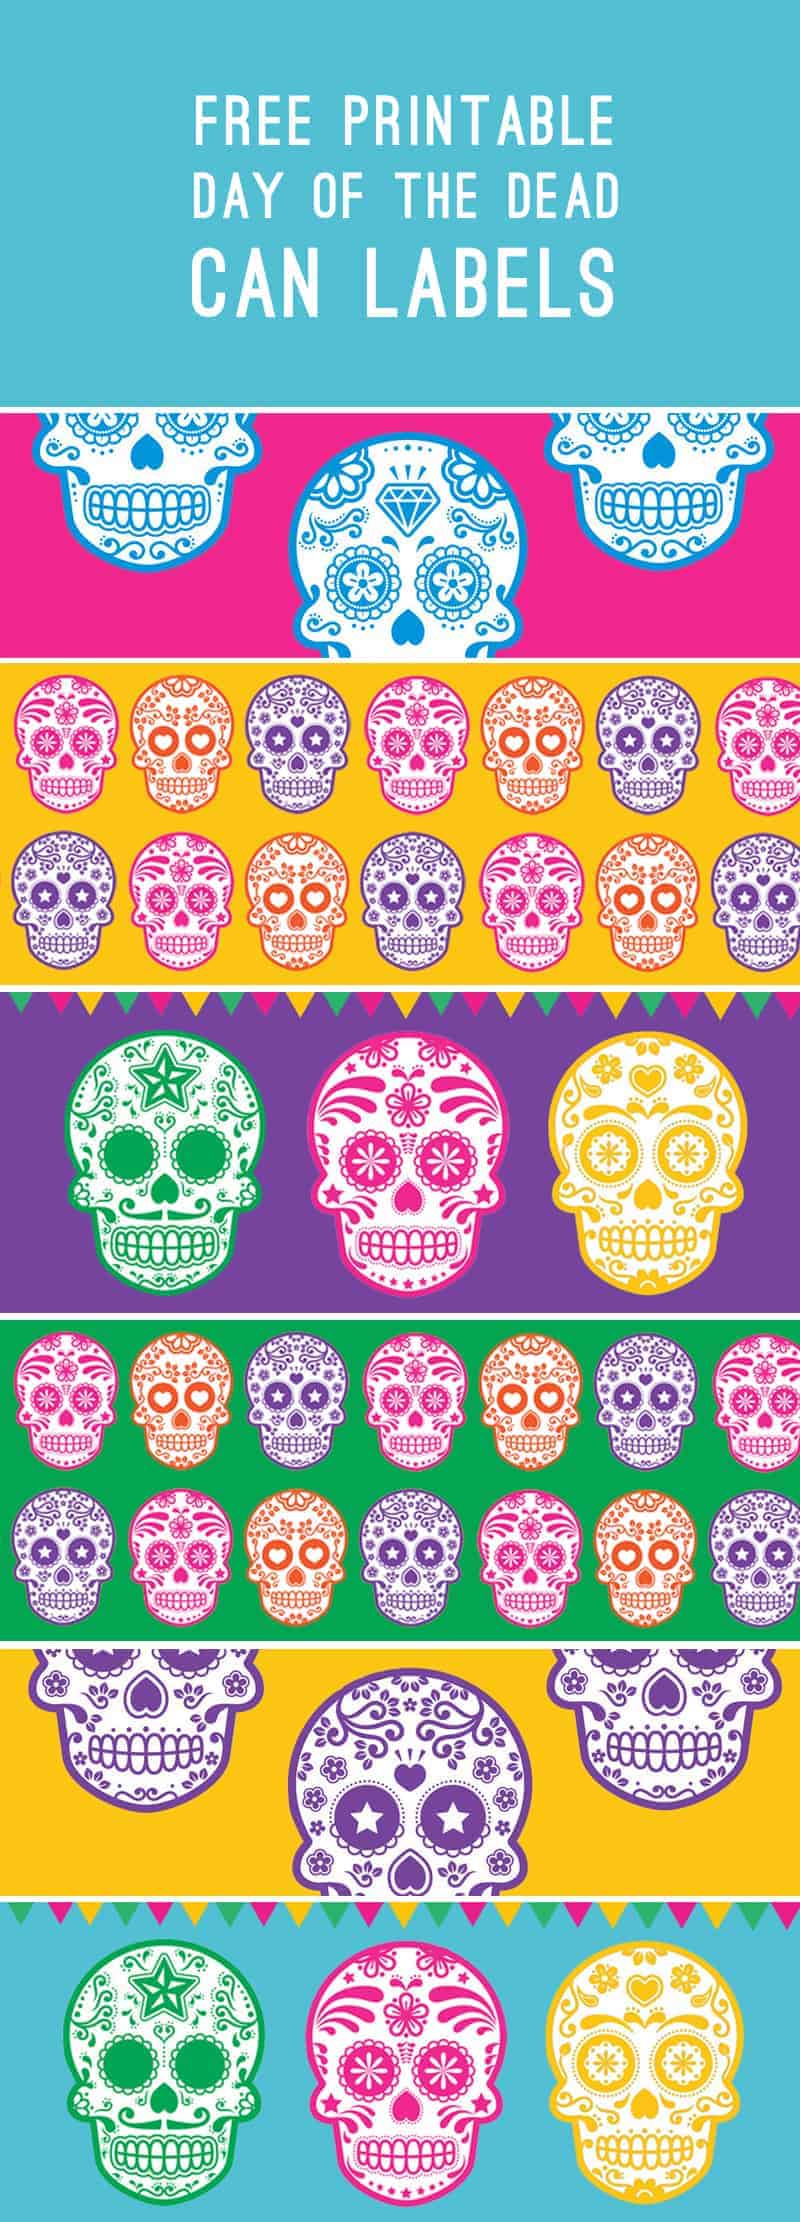 free-printable-day-of-the-dead-dia-de-los-muertos-decorations-can-labels-colourful-mexican-wedding-decor-9